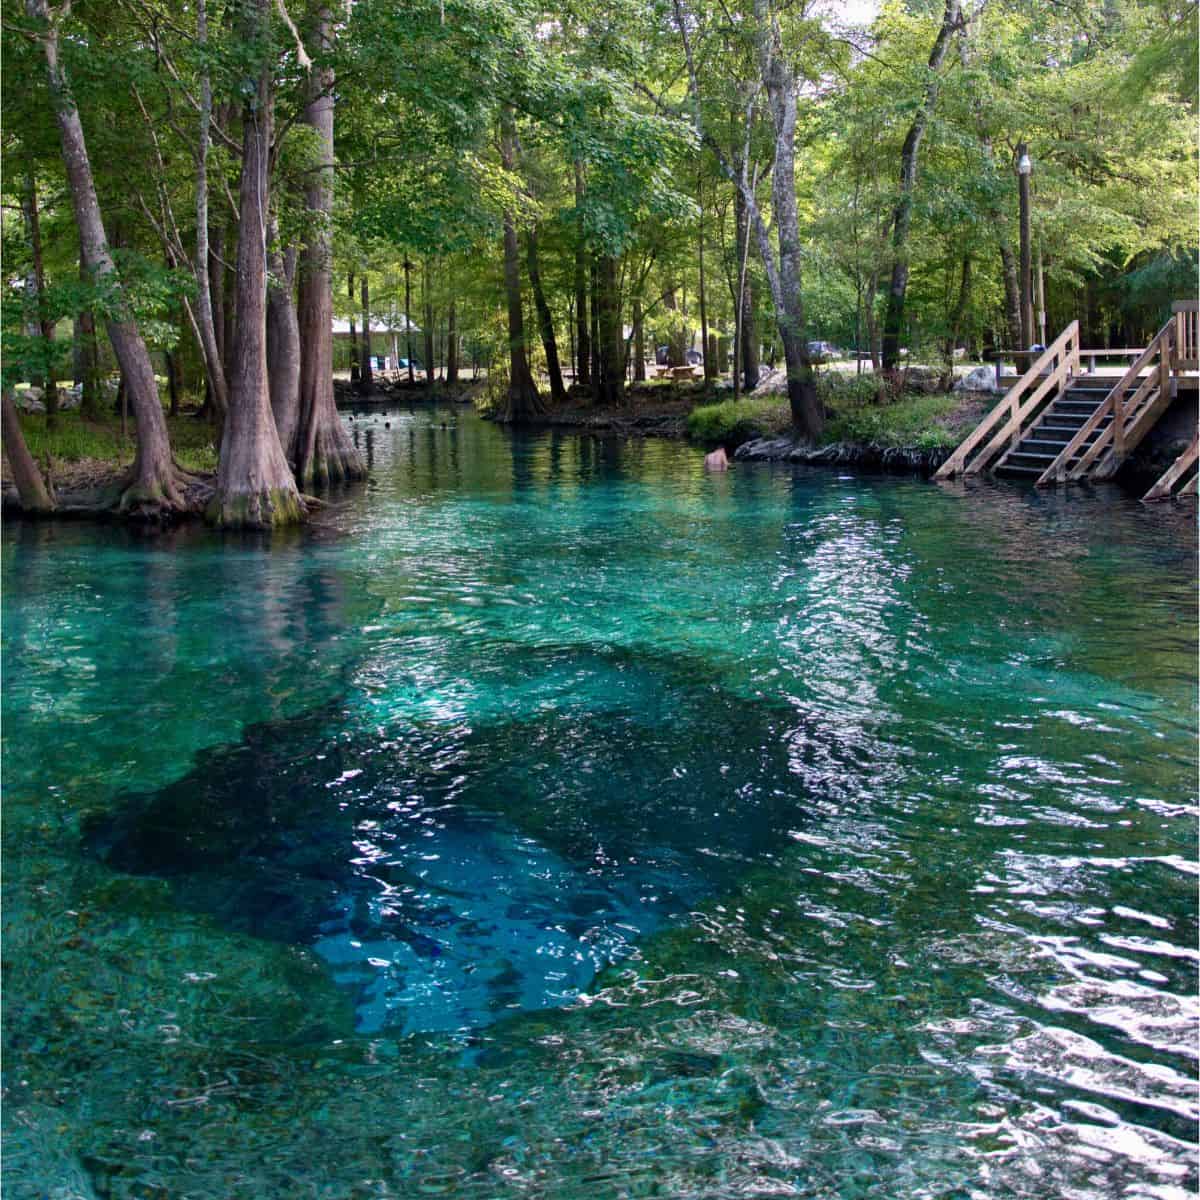 A beautiful photo of pristine blue green waters of a natural spring in florida. You can see several people in the distance wading in the healing waters.